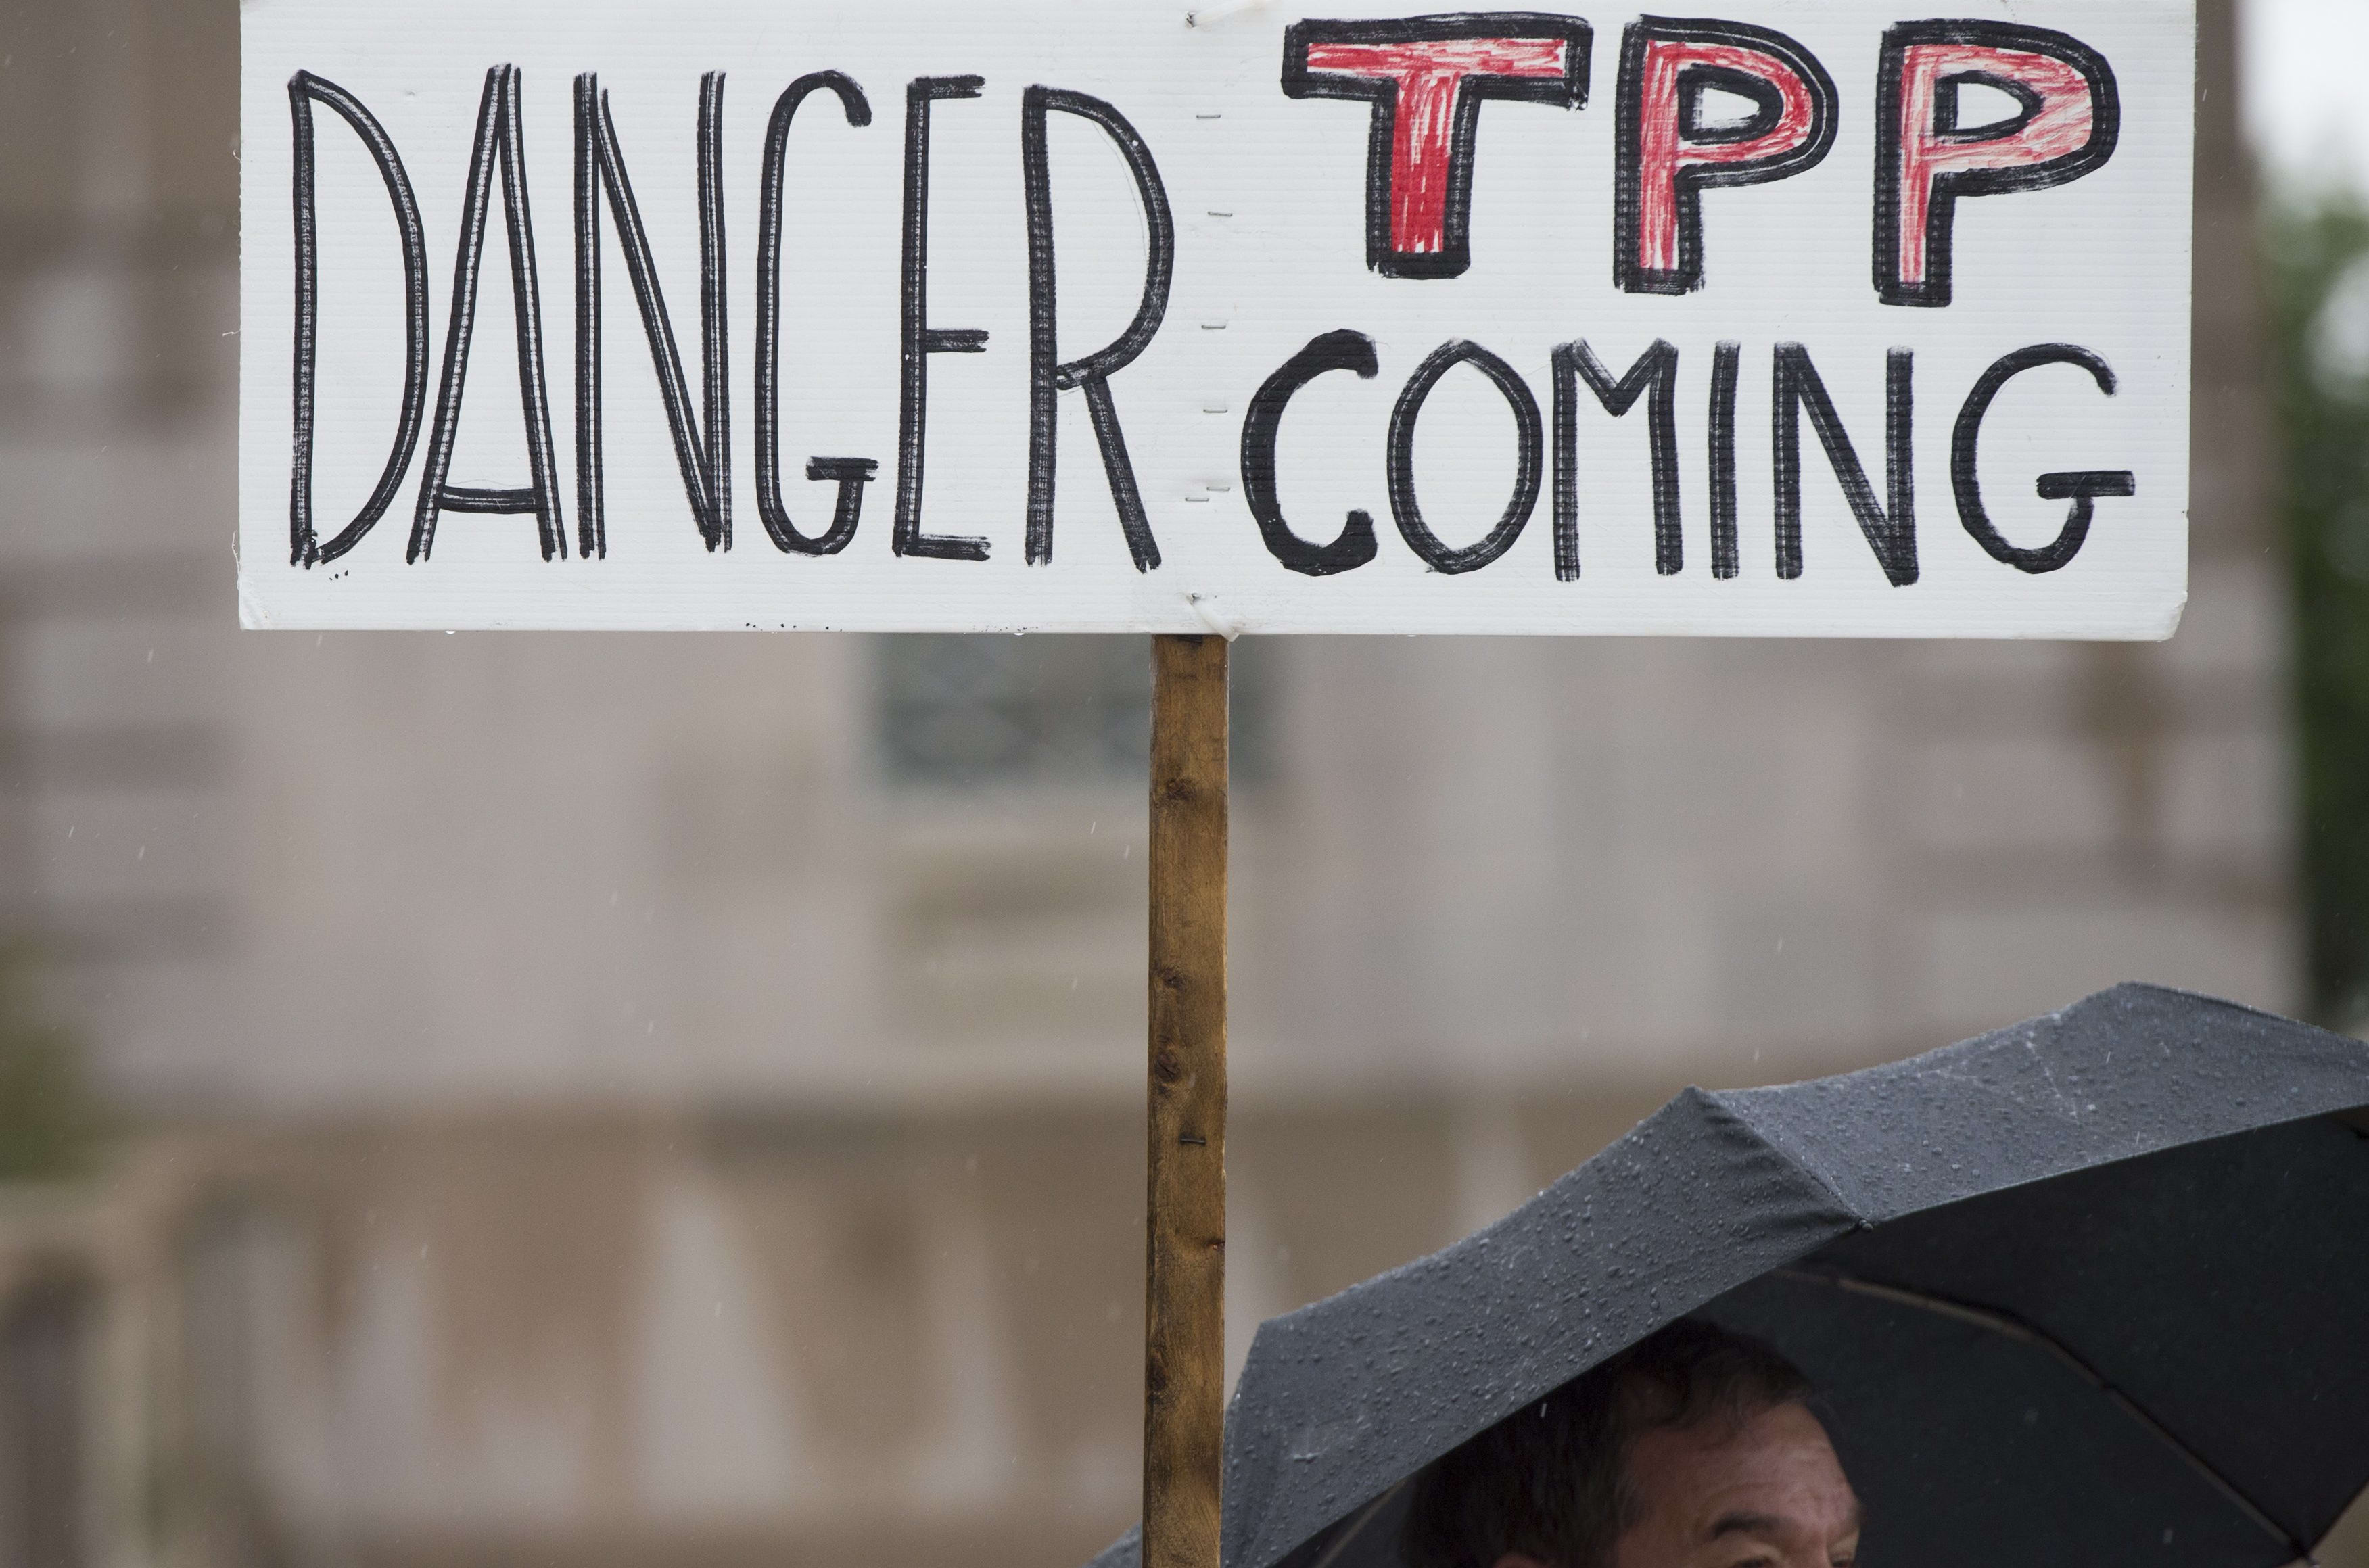 People all over the world have protested against the TPP trade deal.